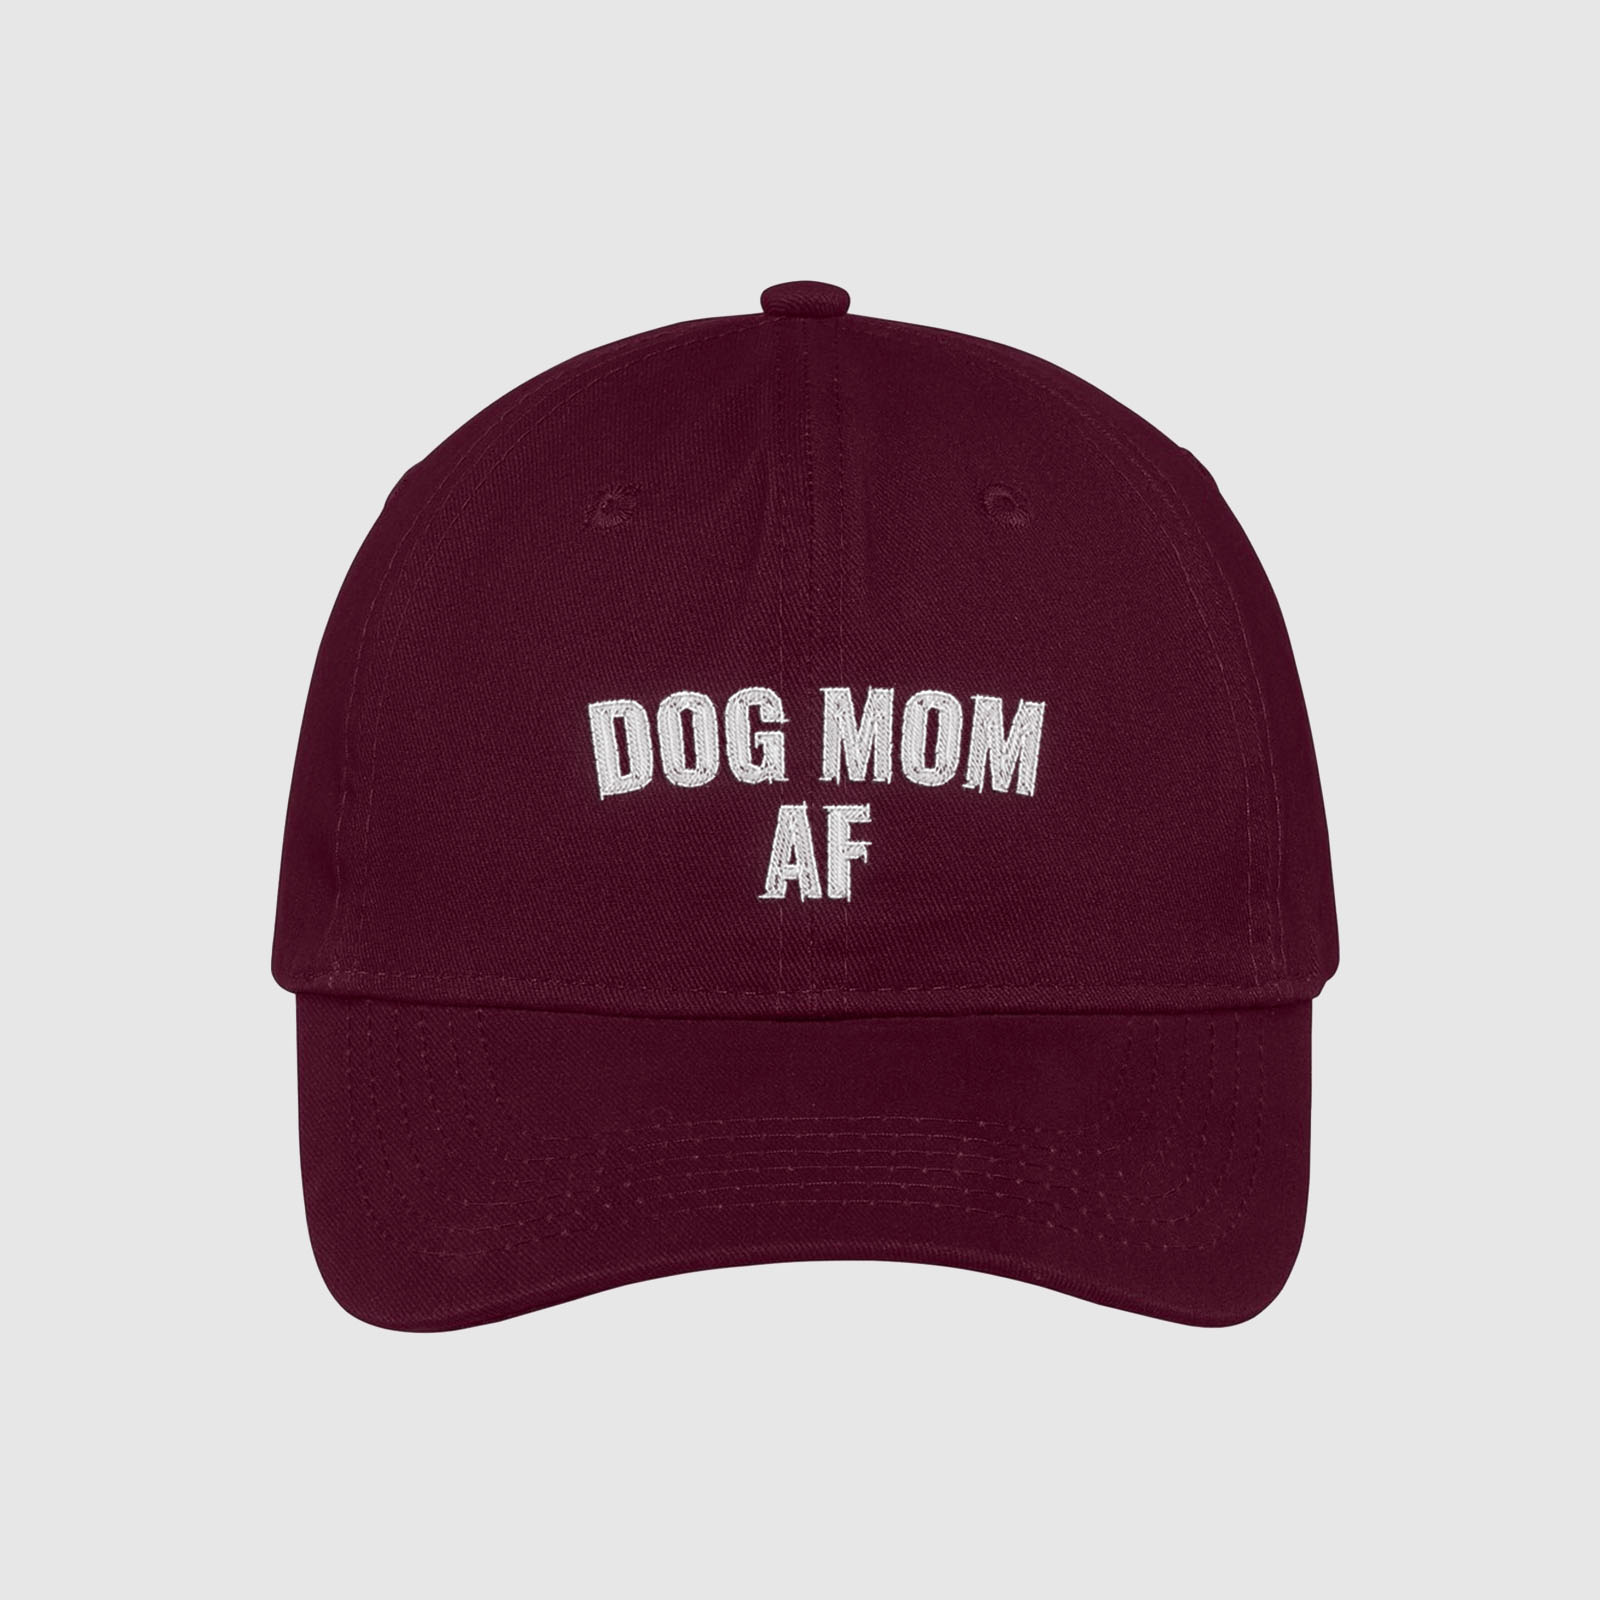 Maroon Dog Mom AF Hat embroidered with white text.